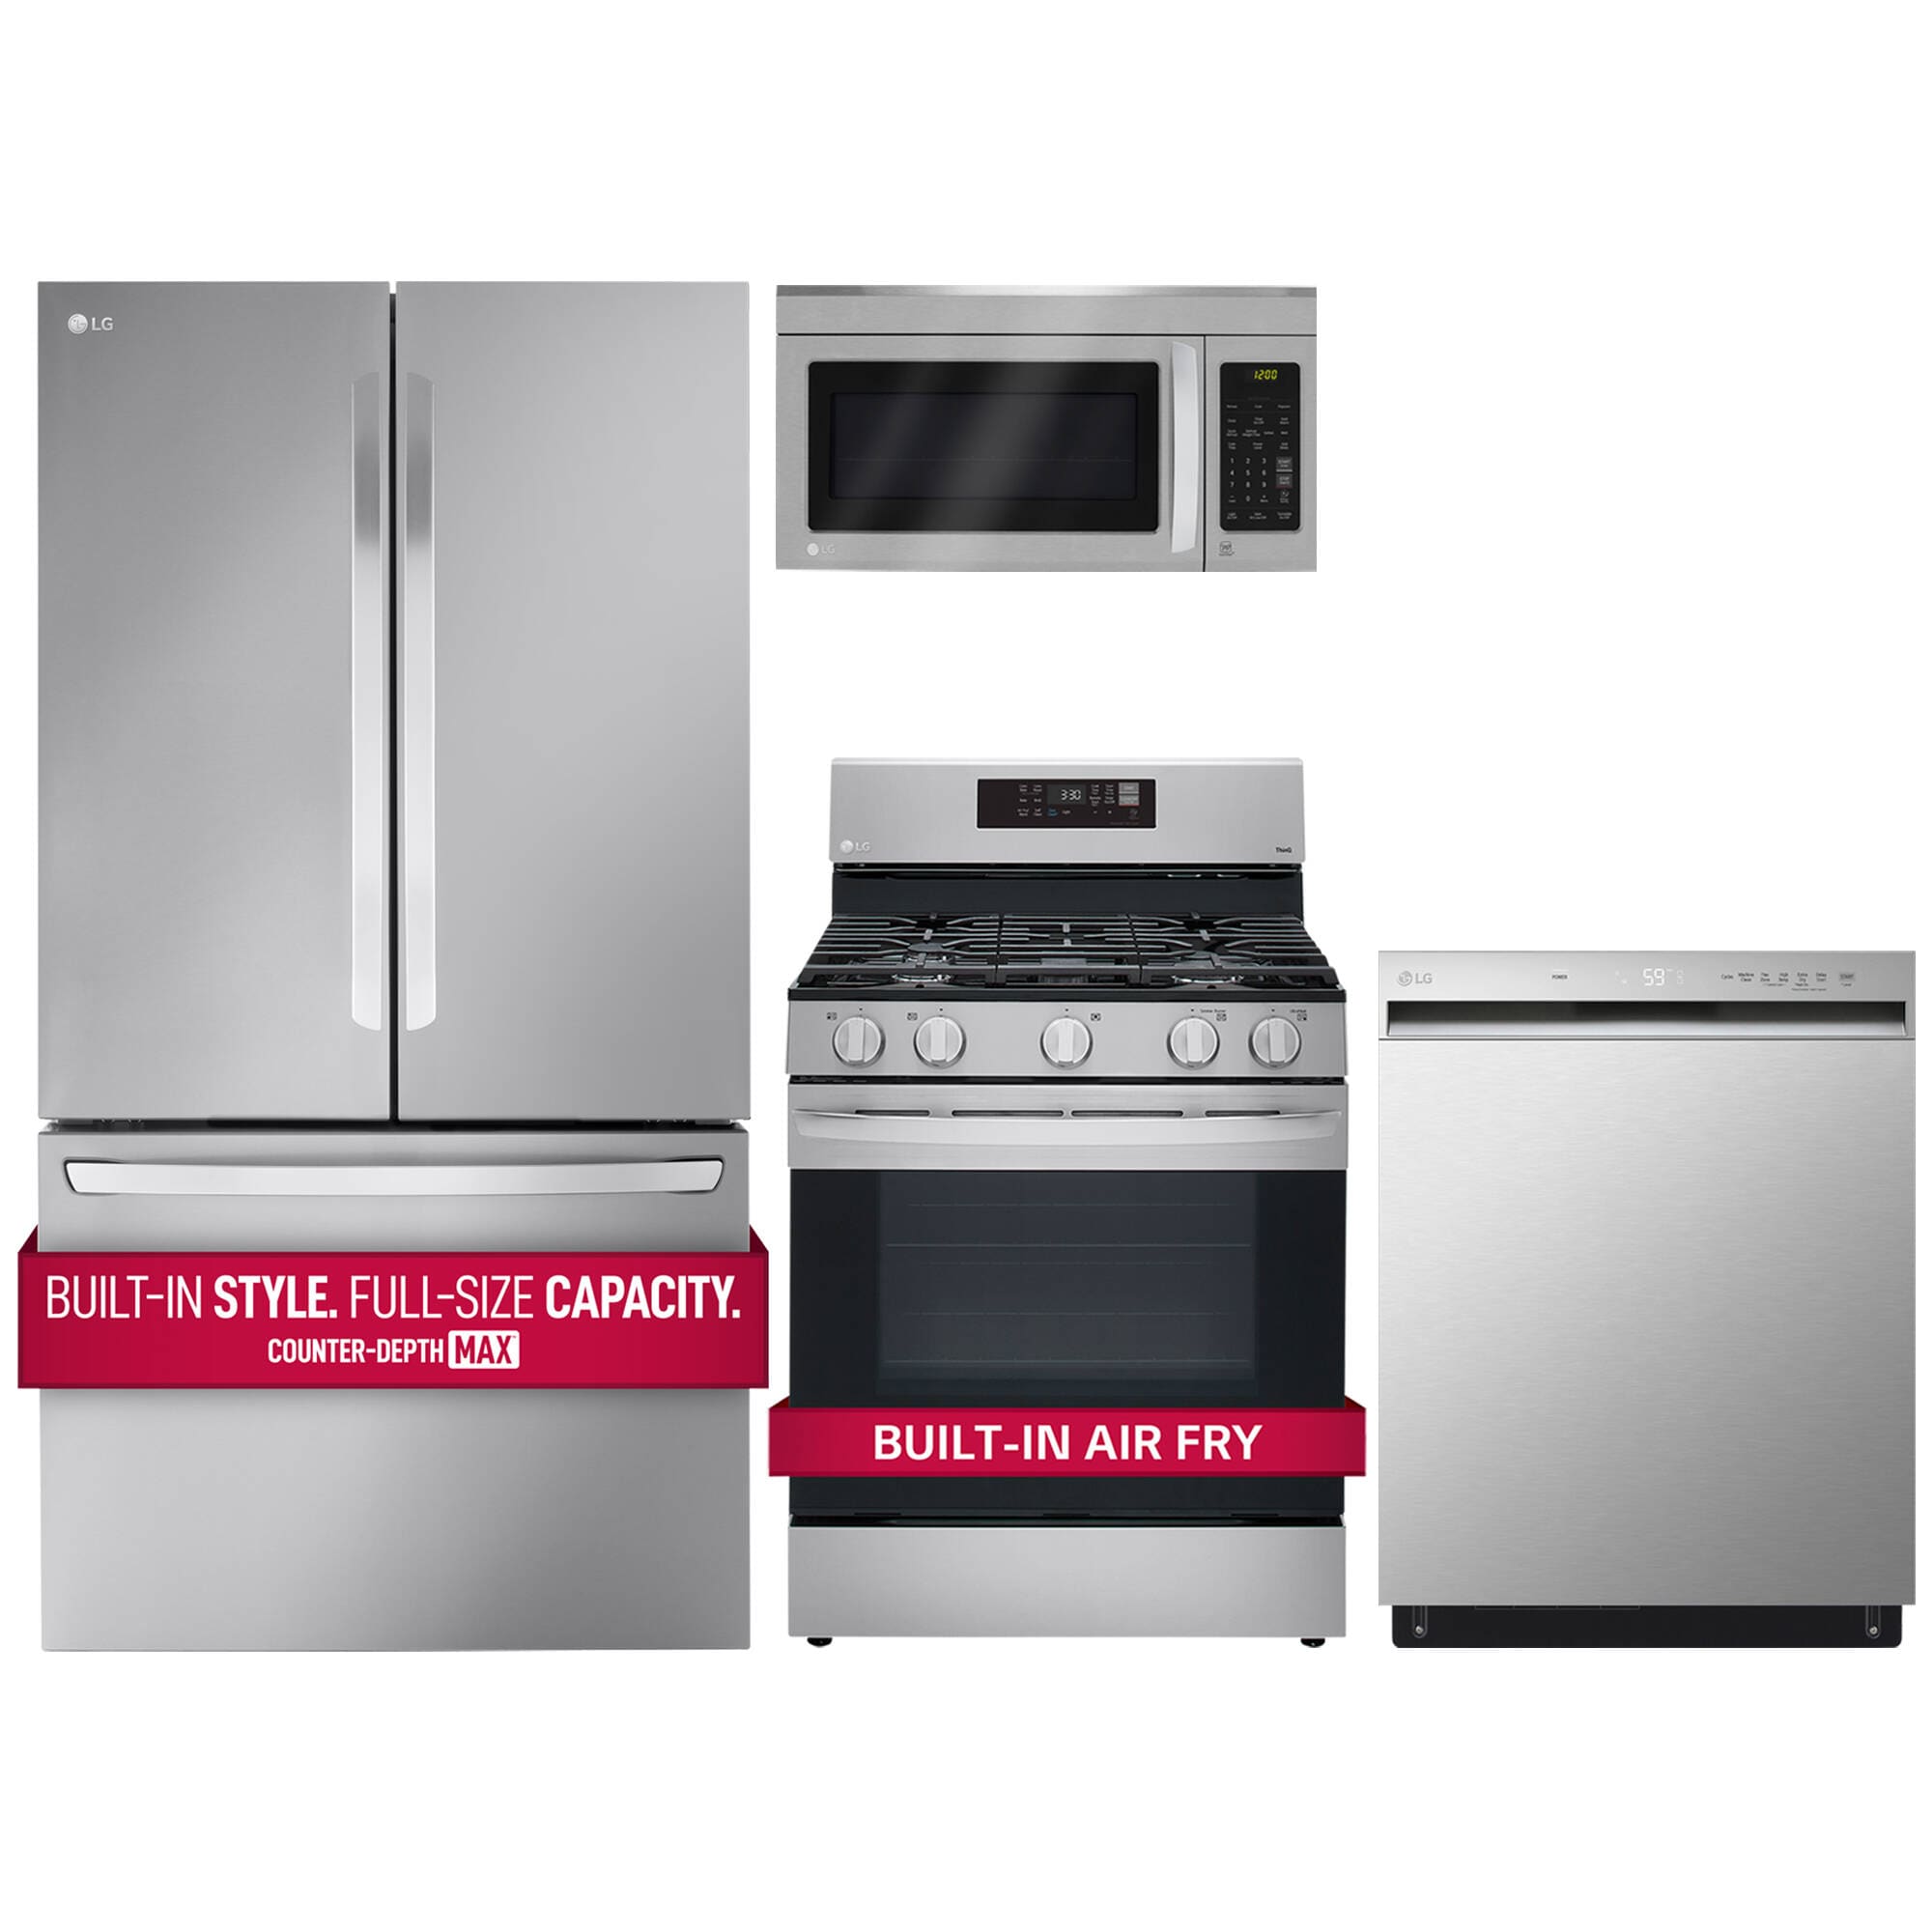 Shop Kitchen Deals & Kitchen Appliance Offers at The Home Depot